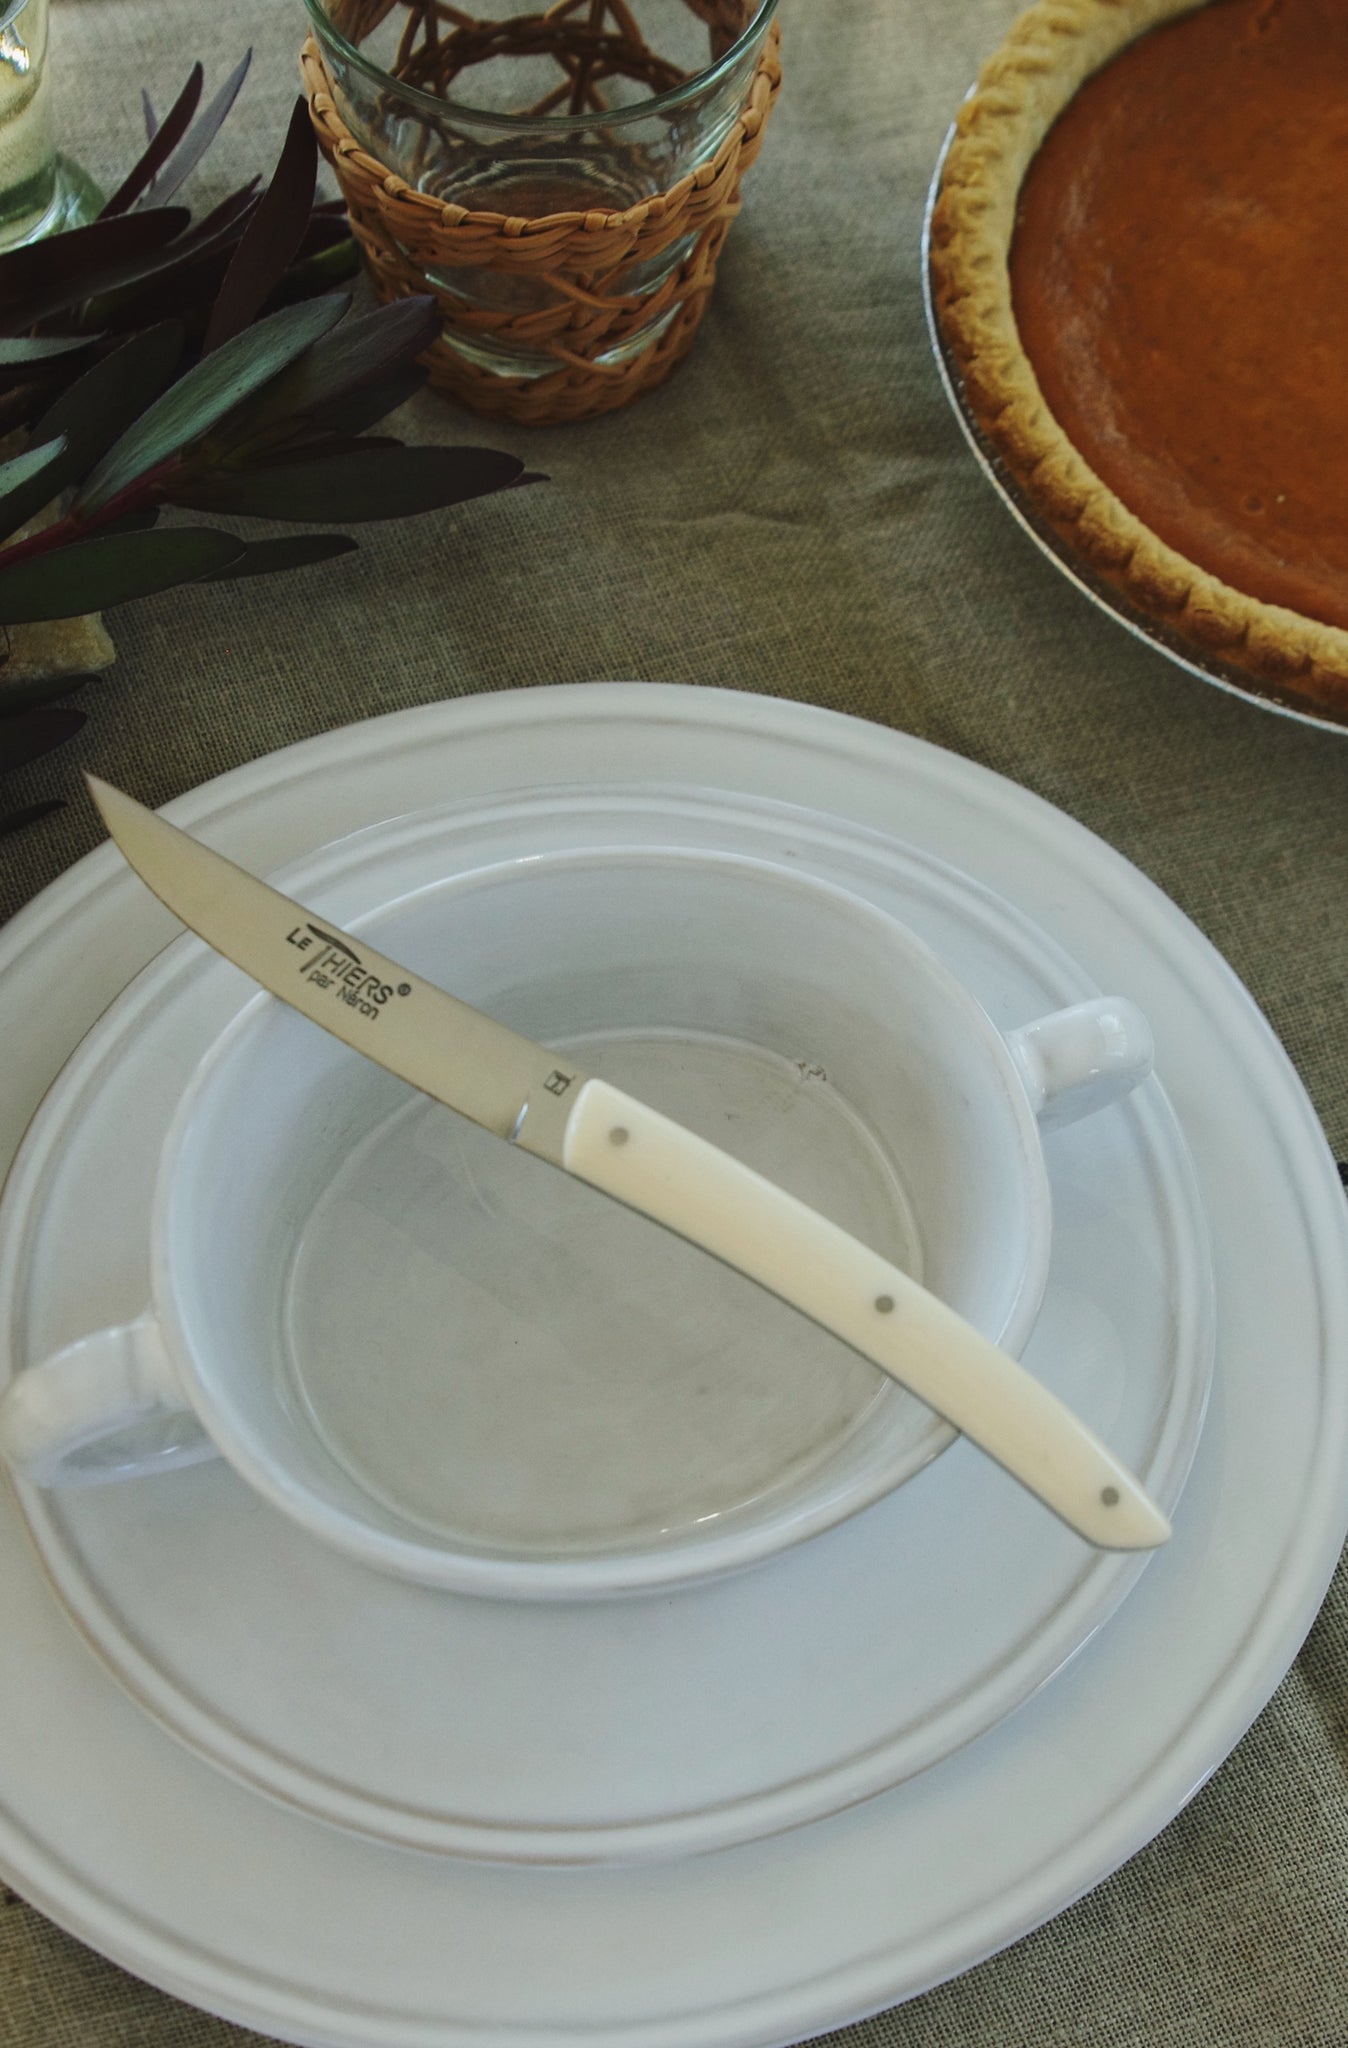 Knife with ivory color handle sitting on top of handled soup bowl which is on top of a stack of two white ceramic plates.